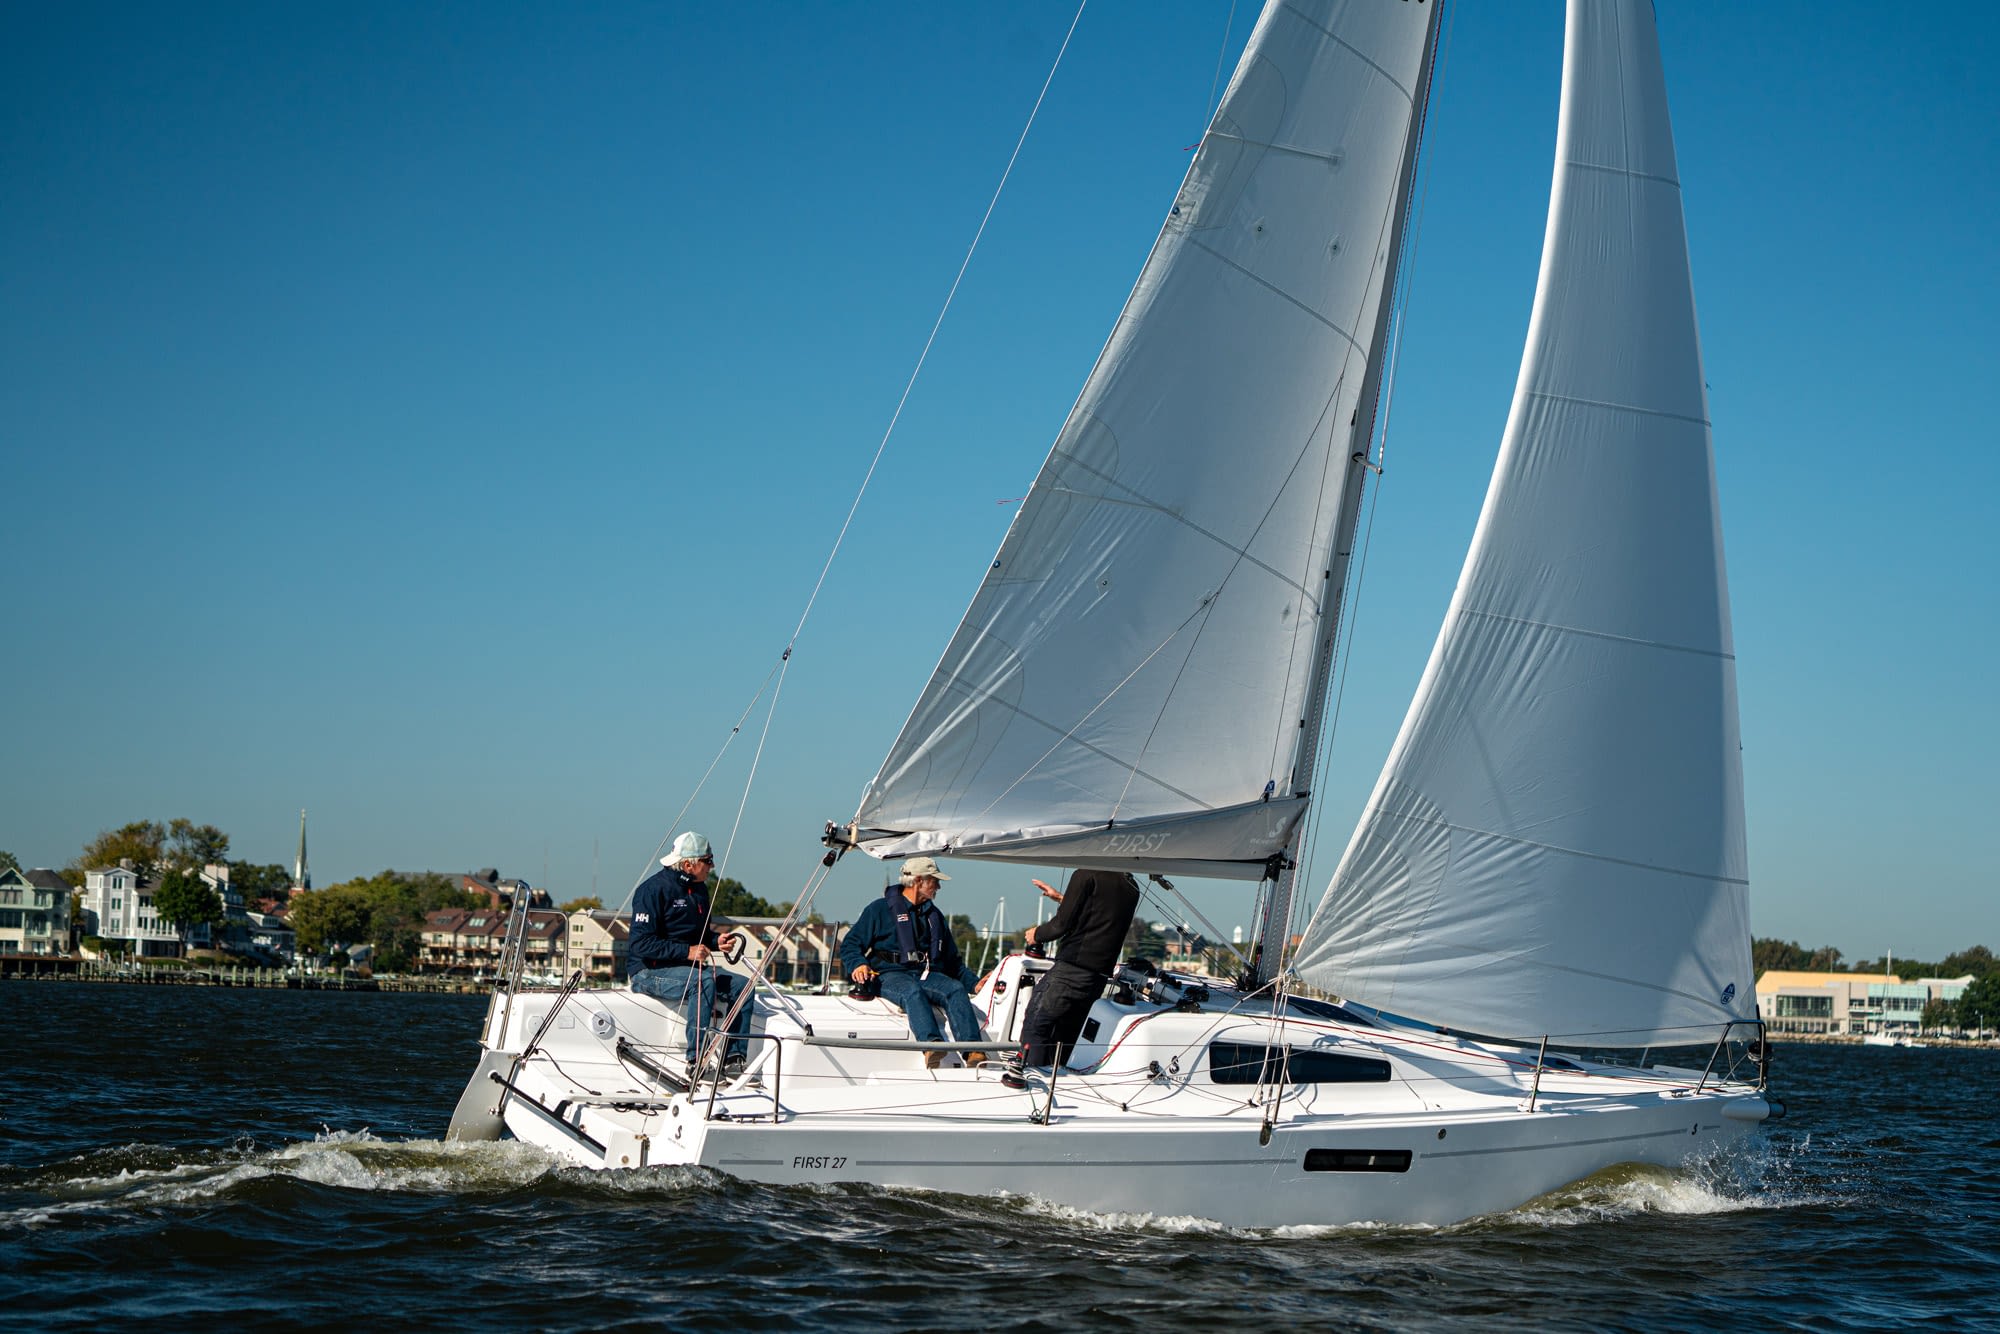 Beneteau First 27 Boat of the Year 2022